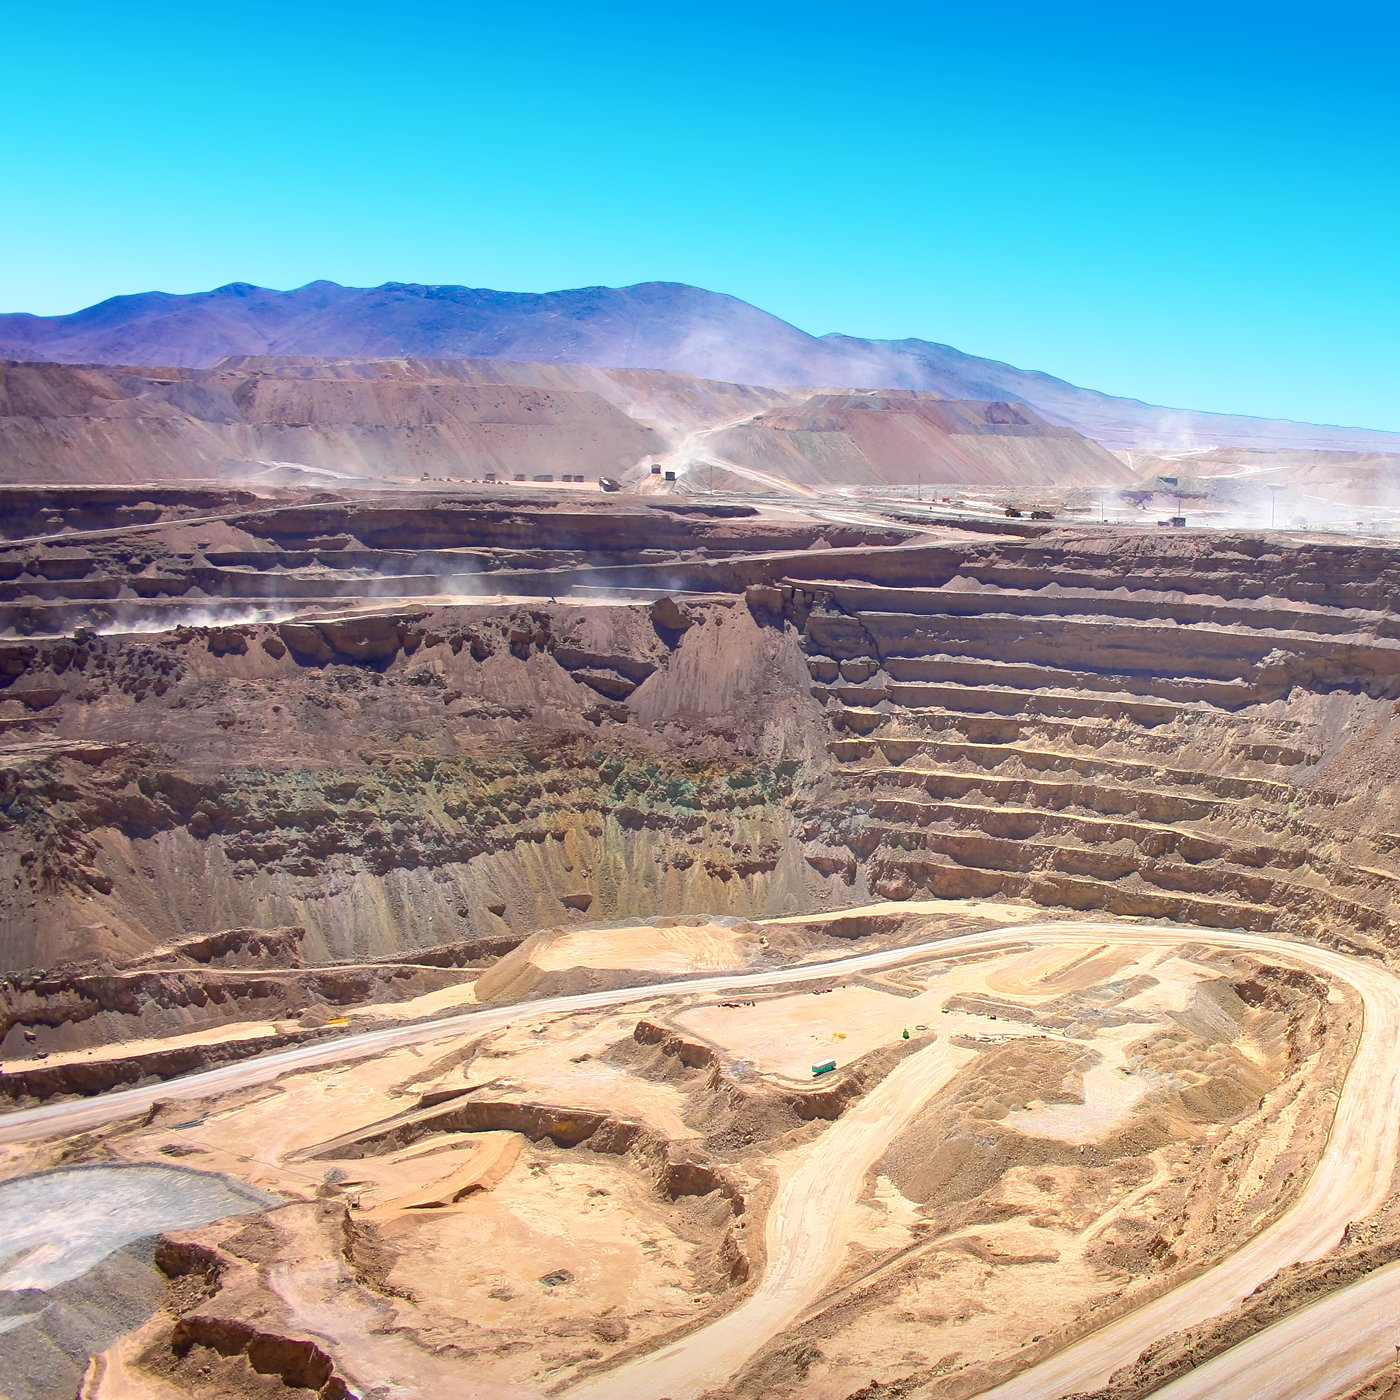 Profitable Mining Plans Start With CostEffective Material Handling